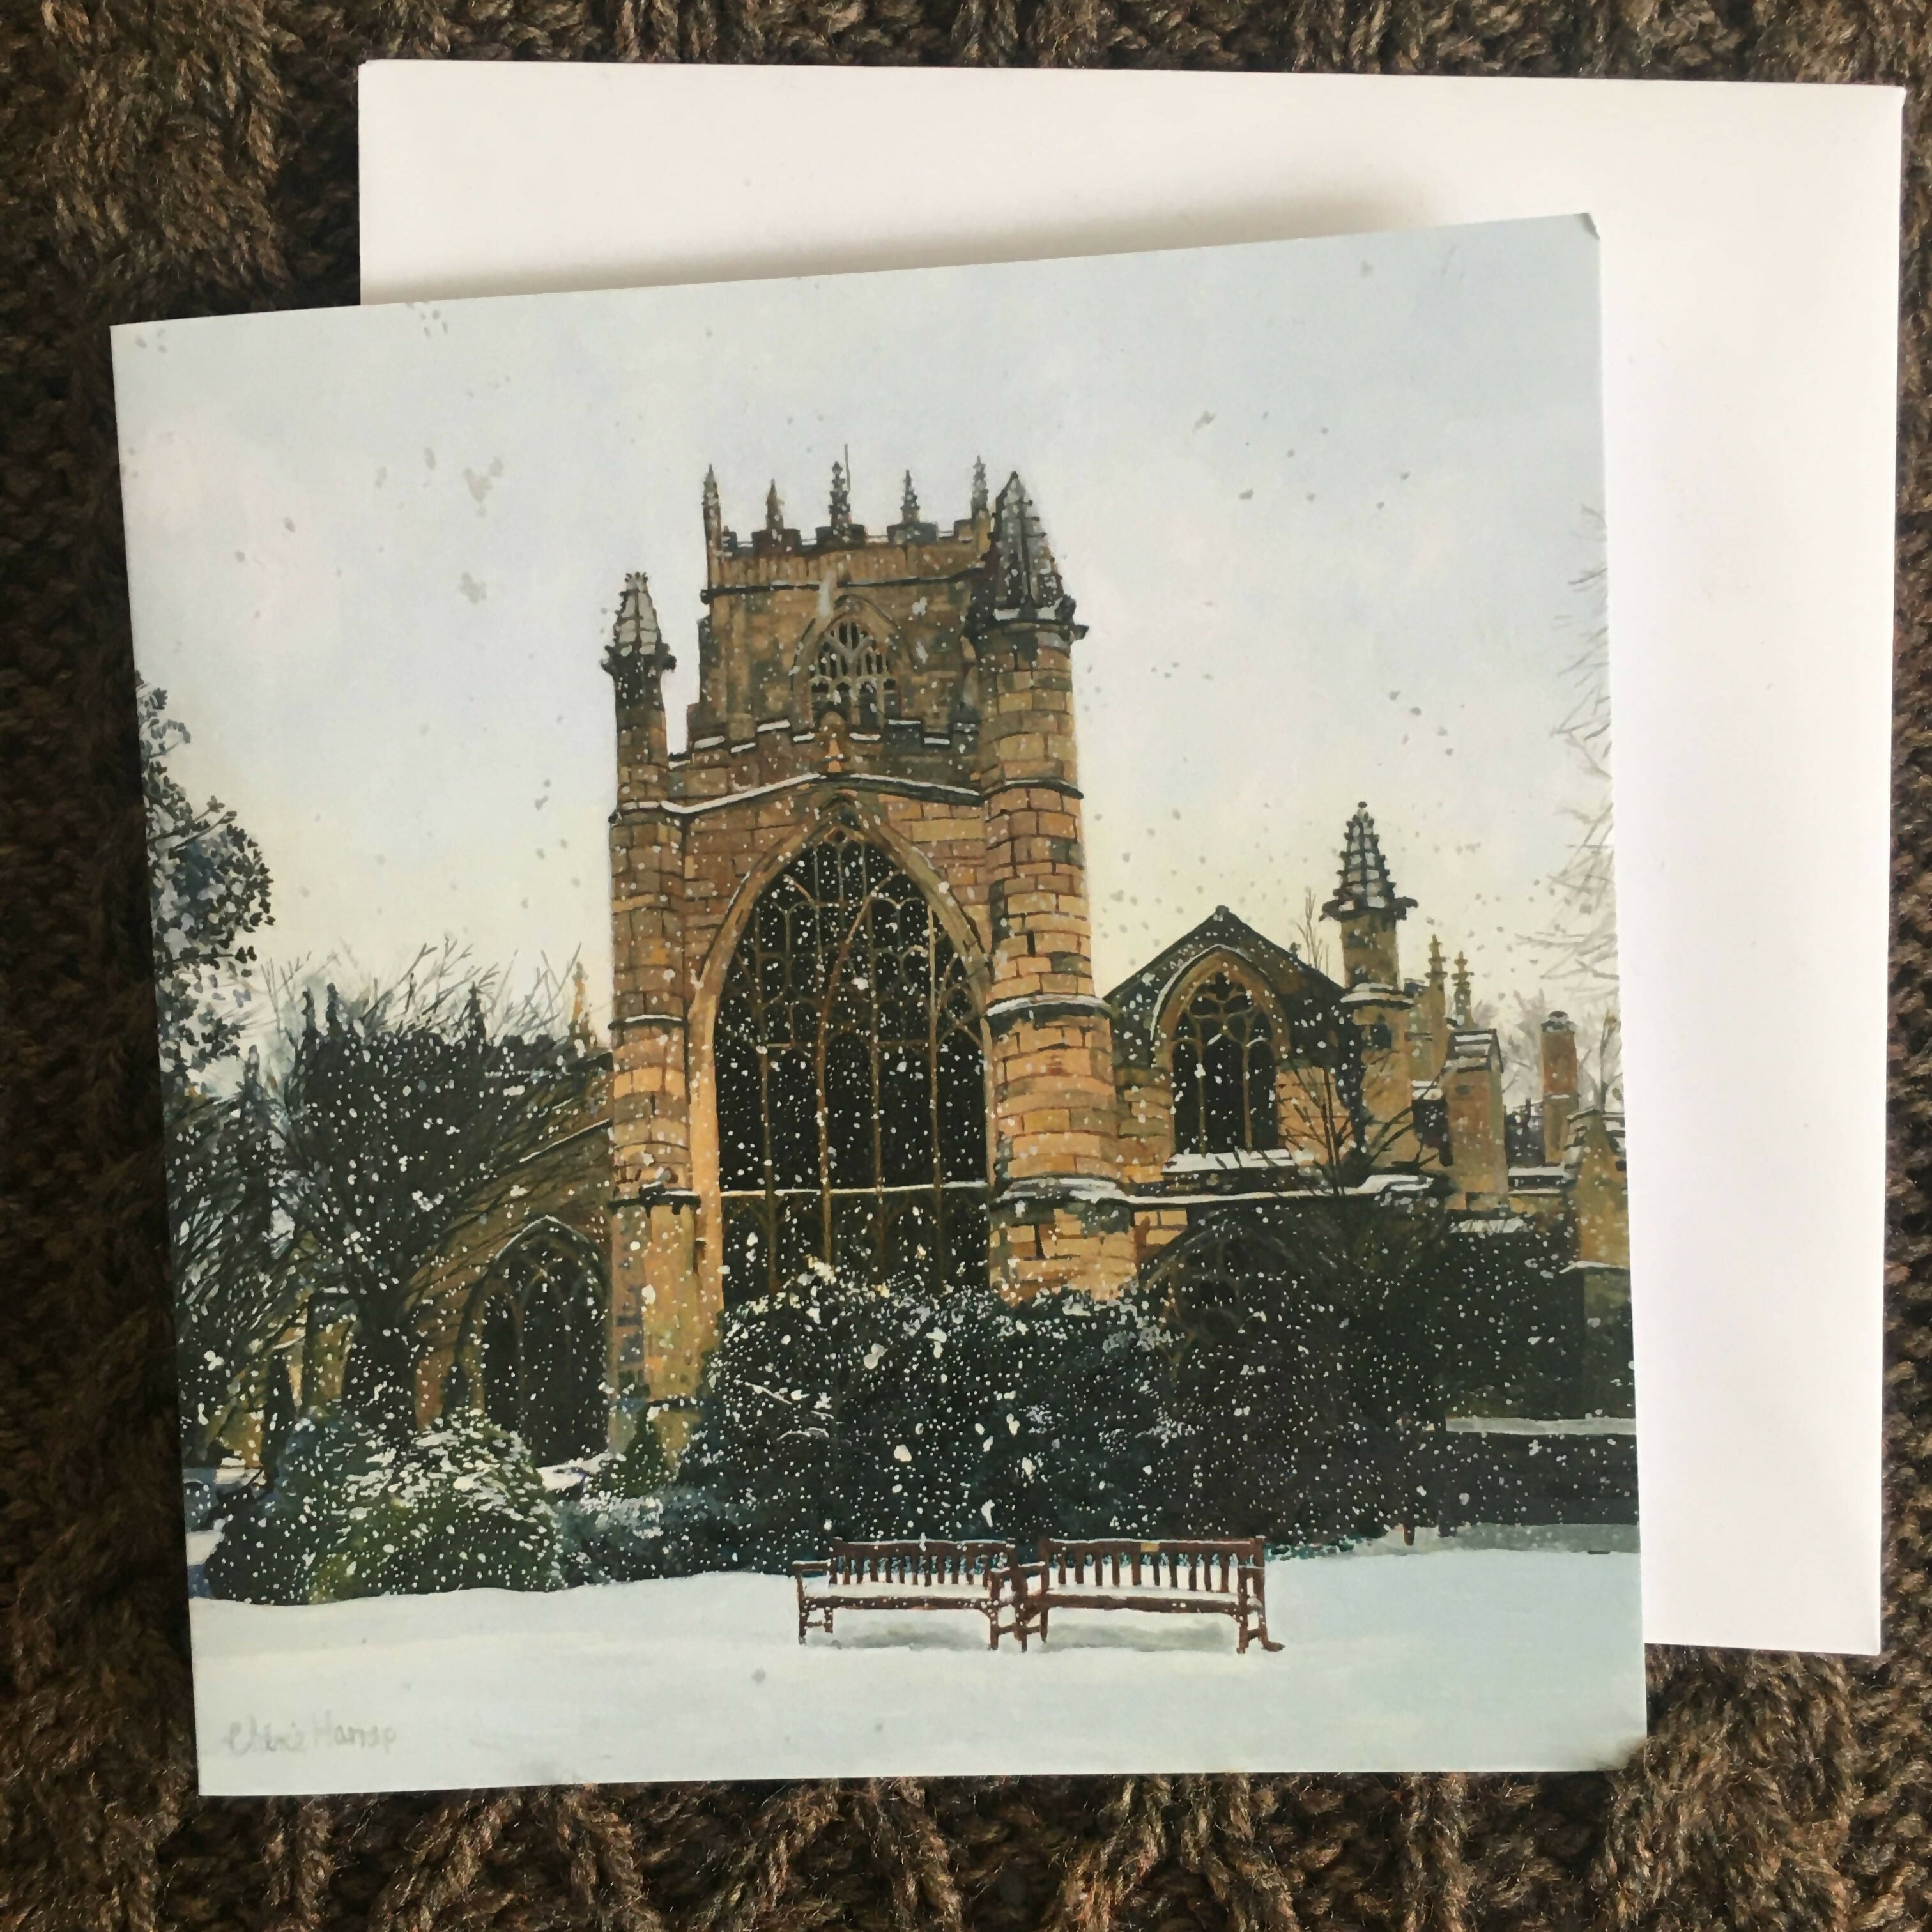 St Mary’s in the snow. Greetings card